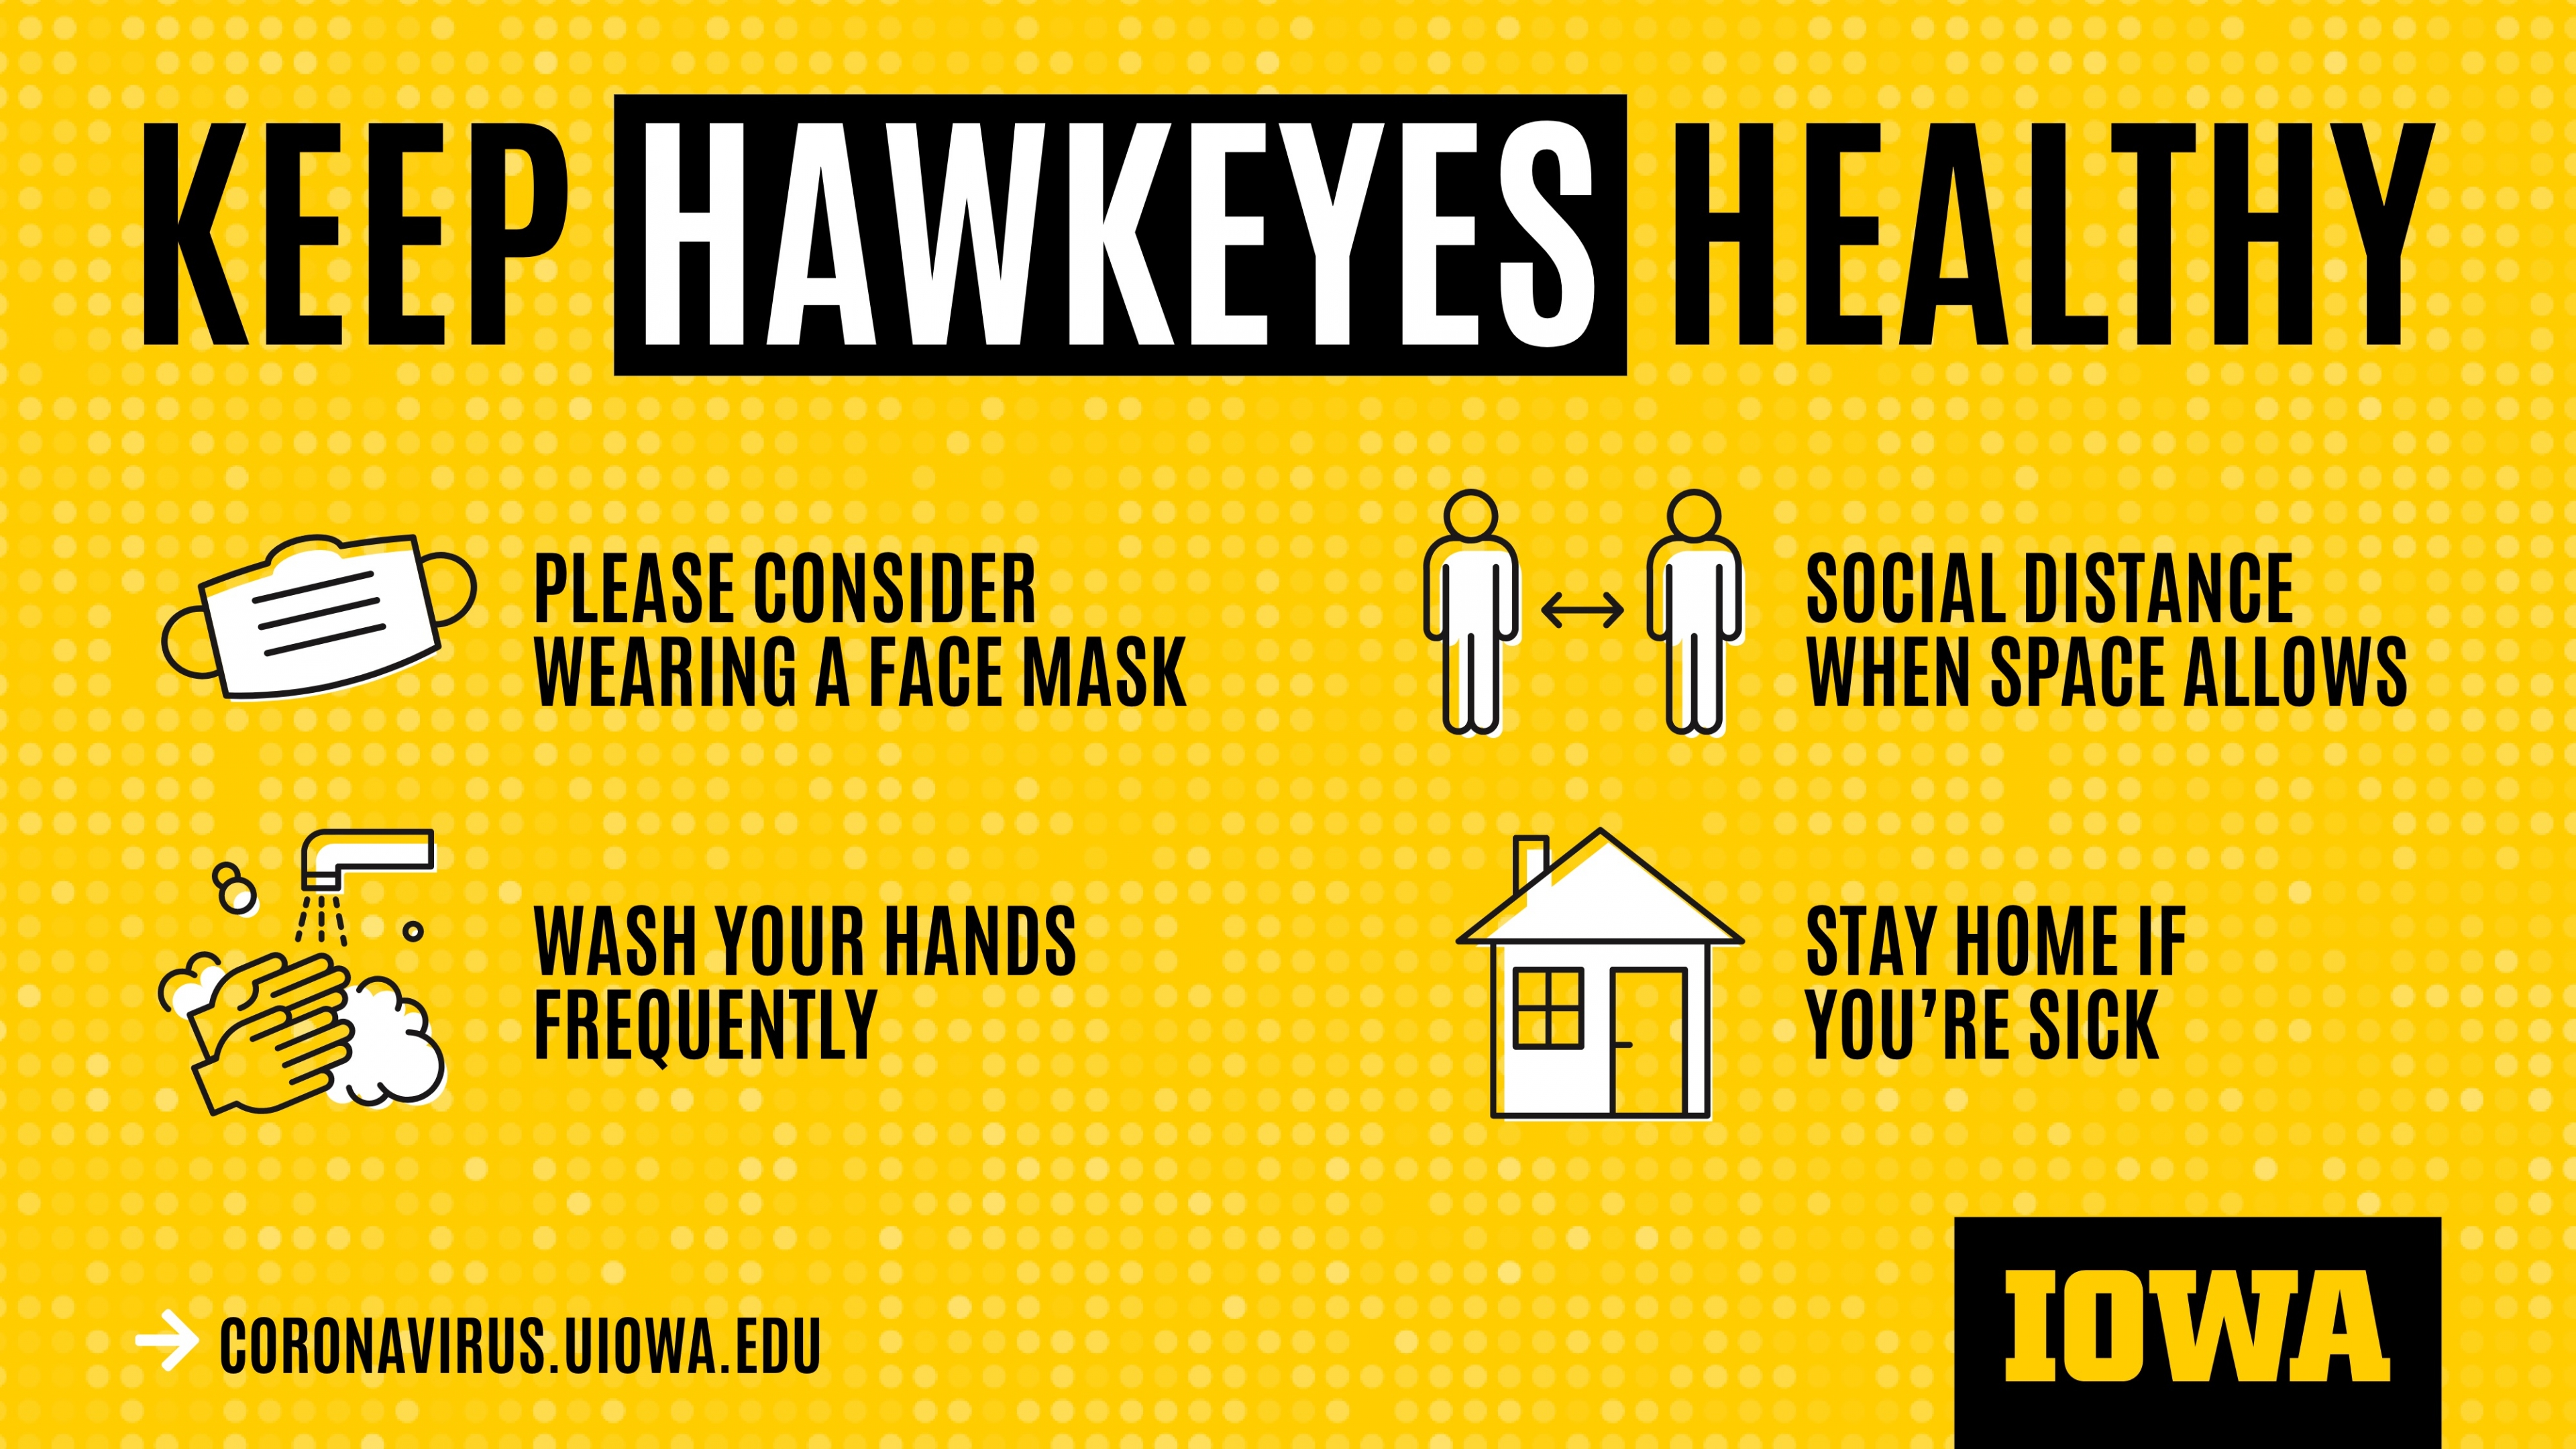 keep hawkeyes healthy please consider wearing a face mask. wash your hands frequently, social distance when space allows. stay home if you're sick.